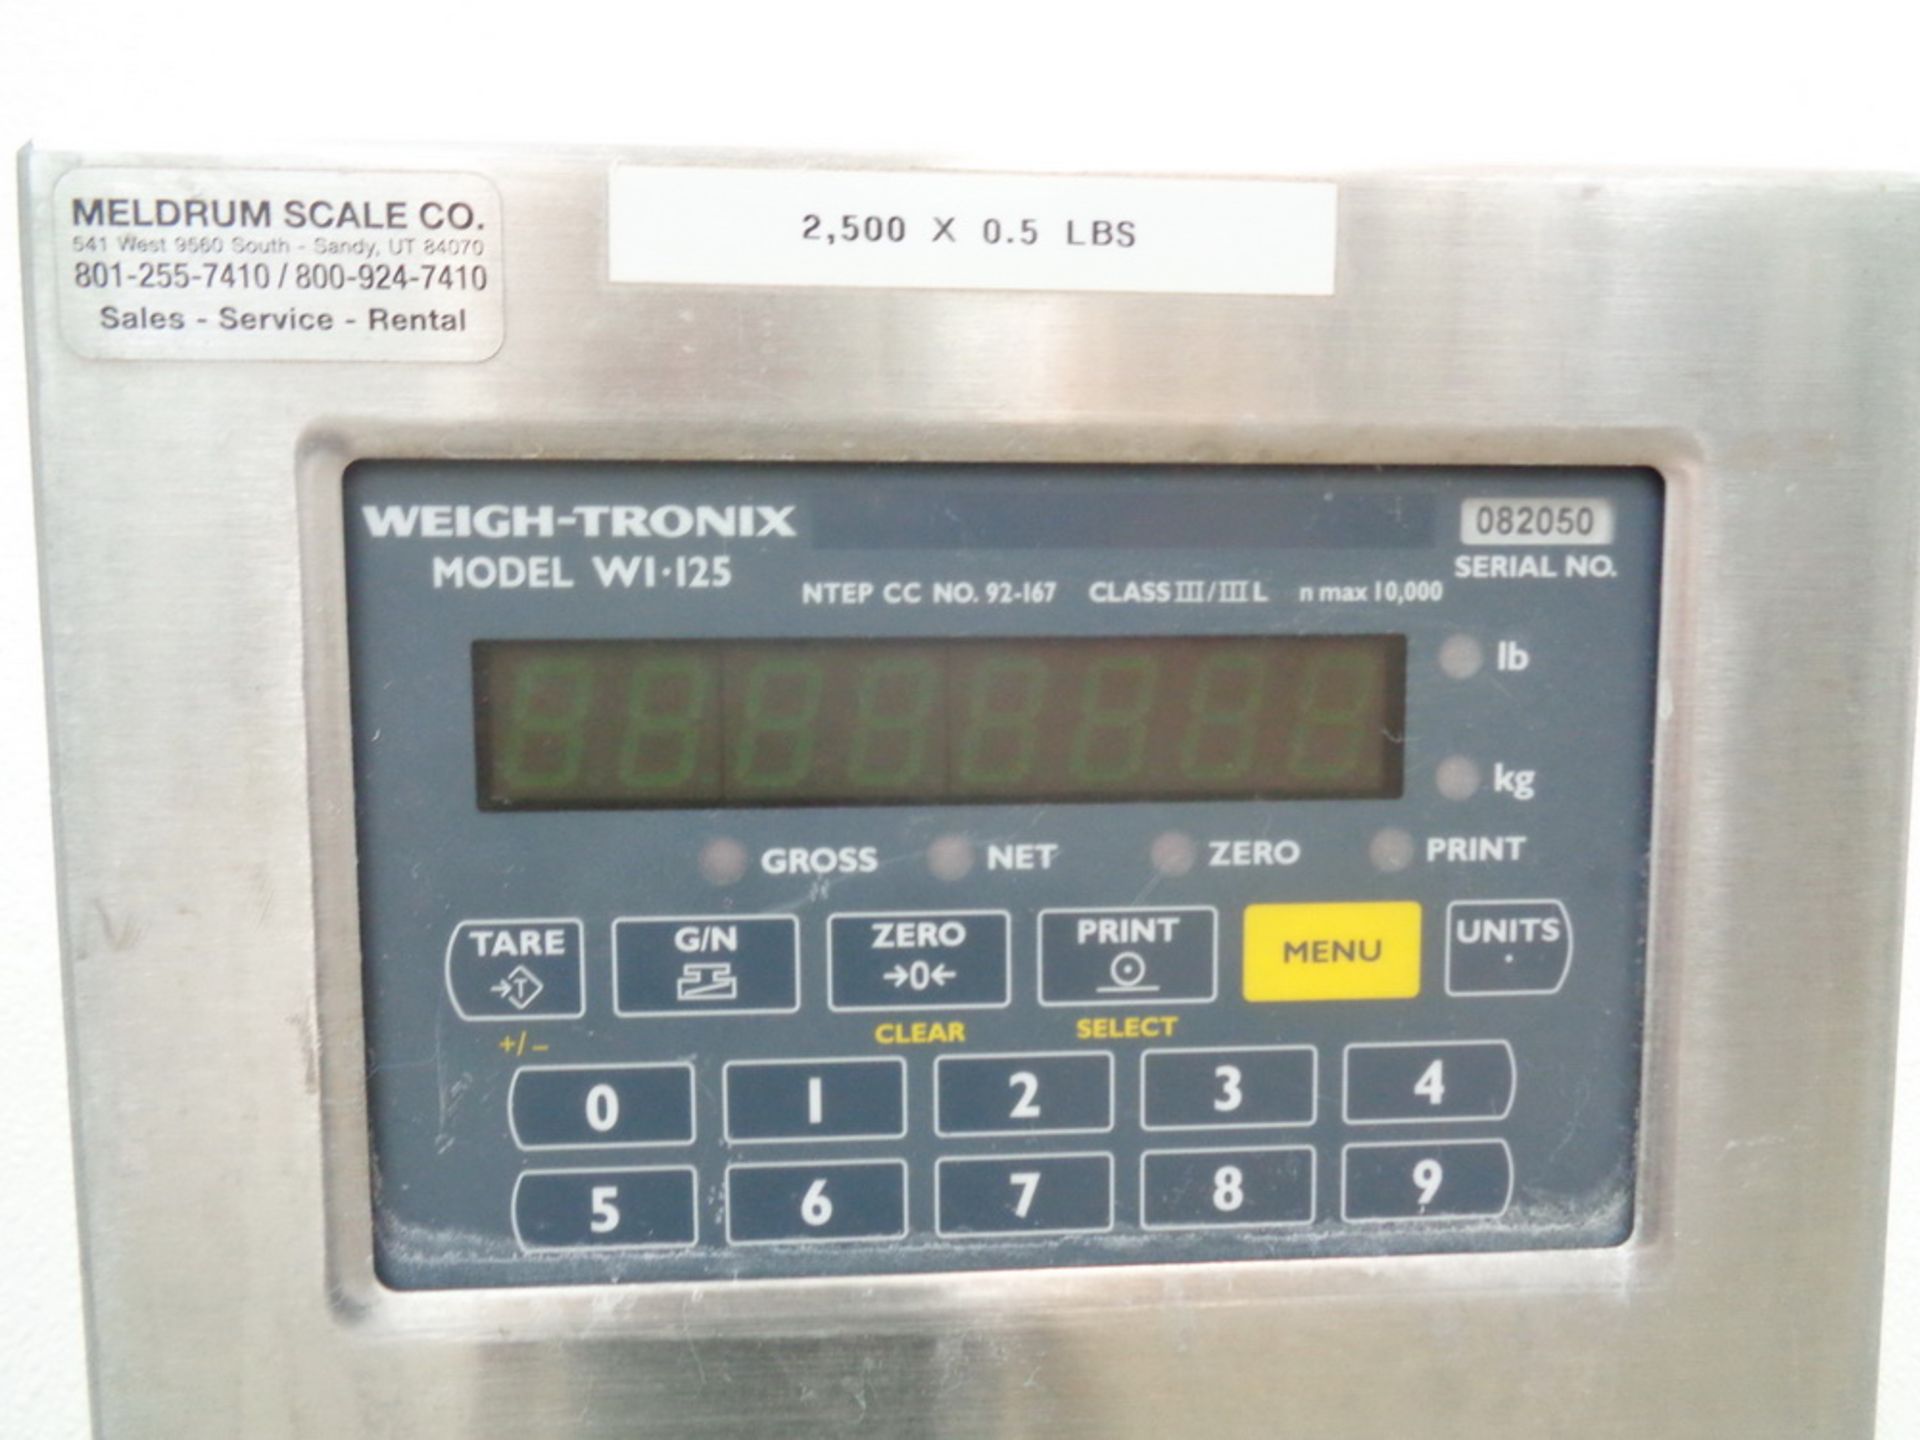 AVERY WEIGHTRONIX DIGITAL SCALE, DISPLAY HEAD ONLY, NO PLATFORM - Image 2 of 2